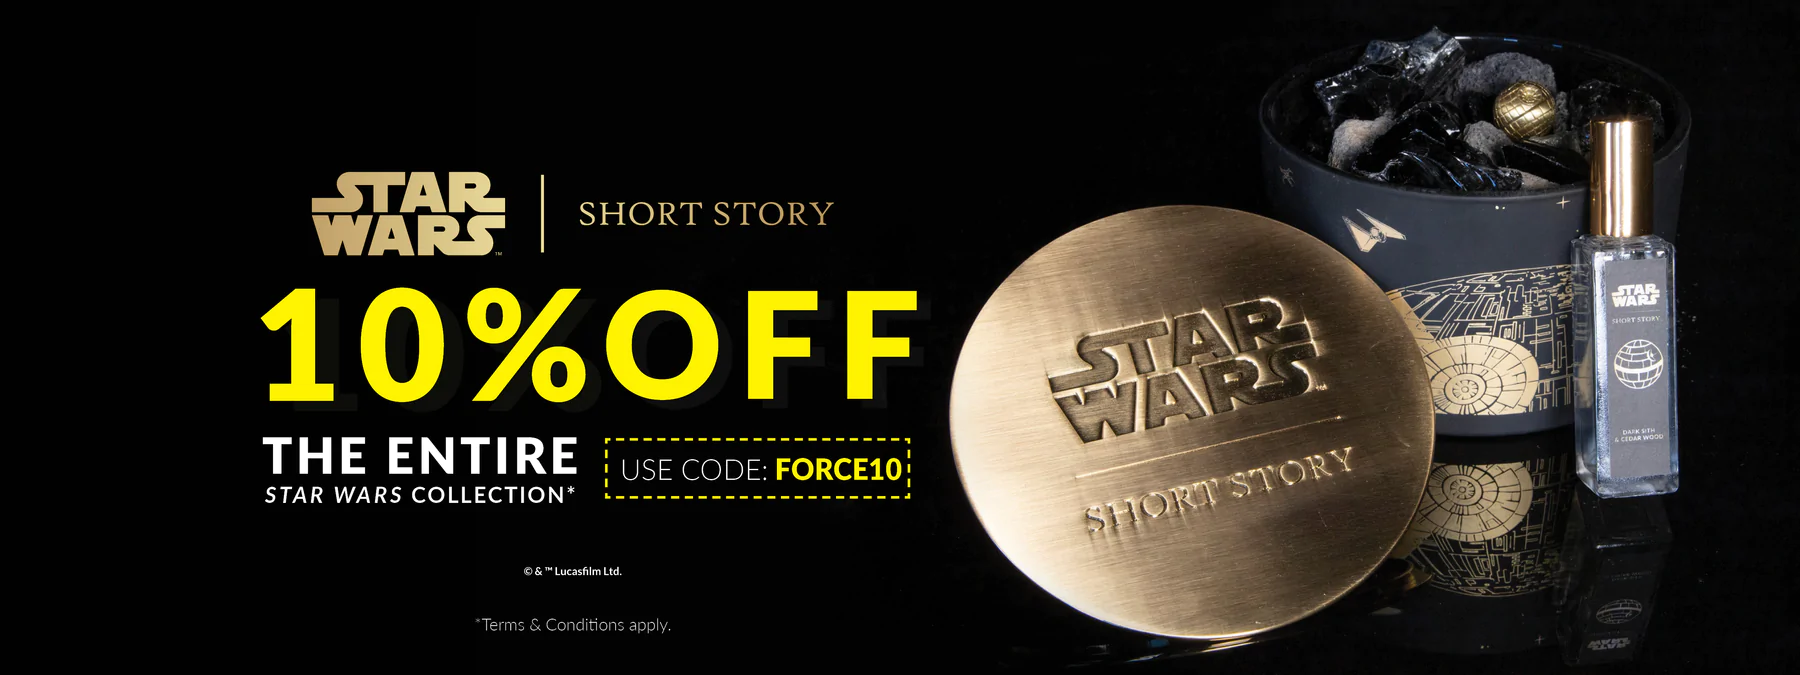 Extra 10% OFF on Star Wars collection with promo code at Short Story